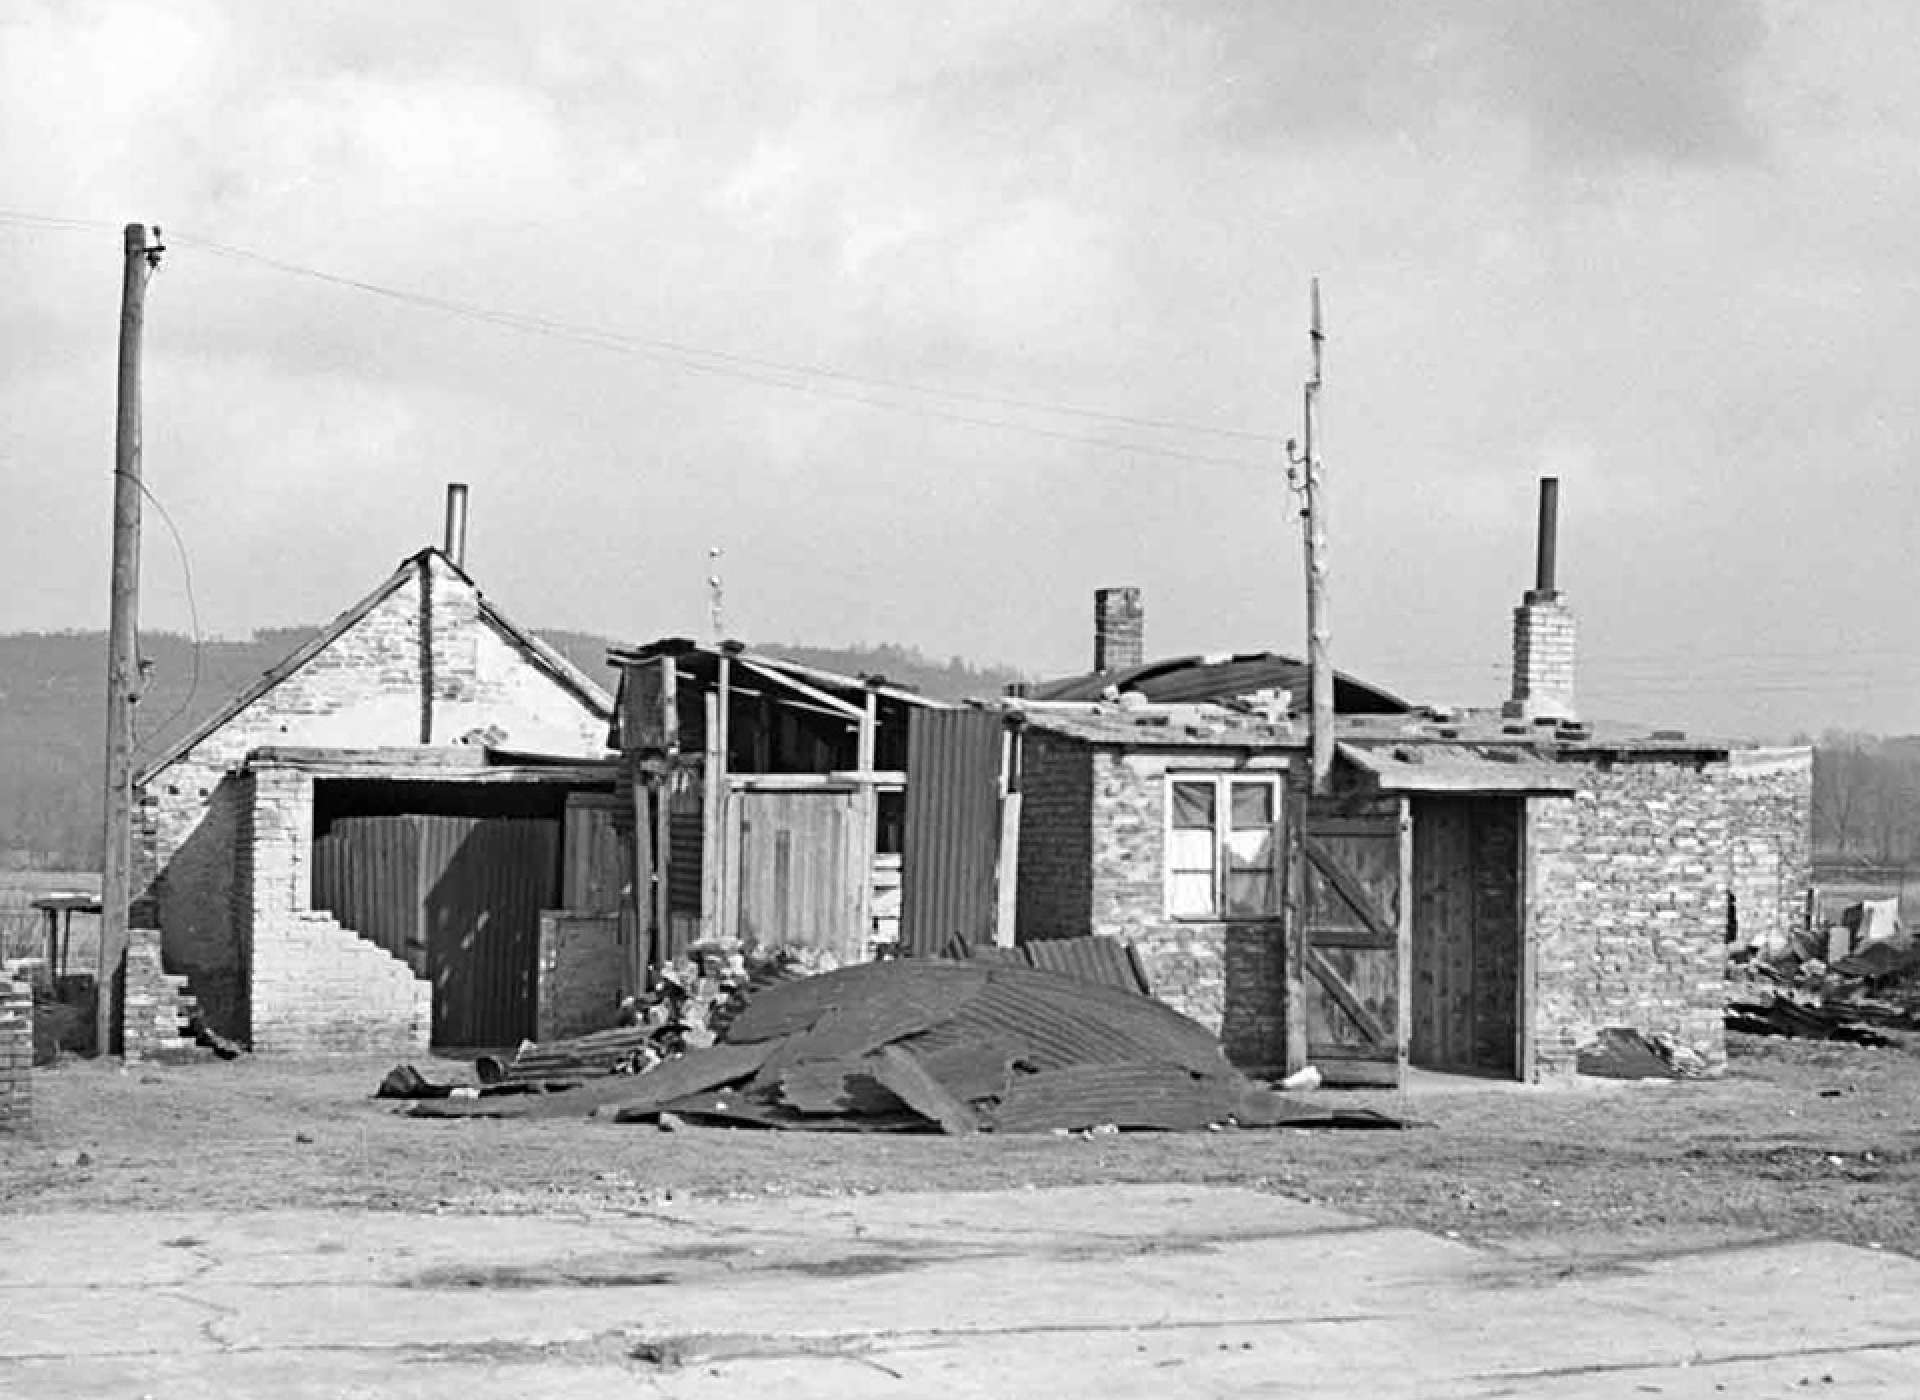 The Papenhütte settlement in Osnabrück ca. 1955. Courtesy of the Lower Saxony State Archives.